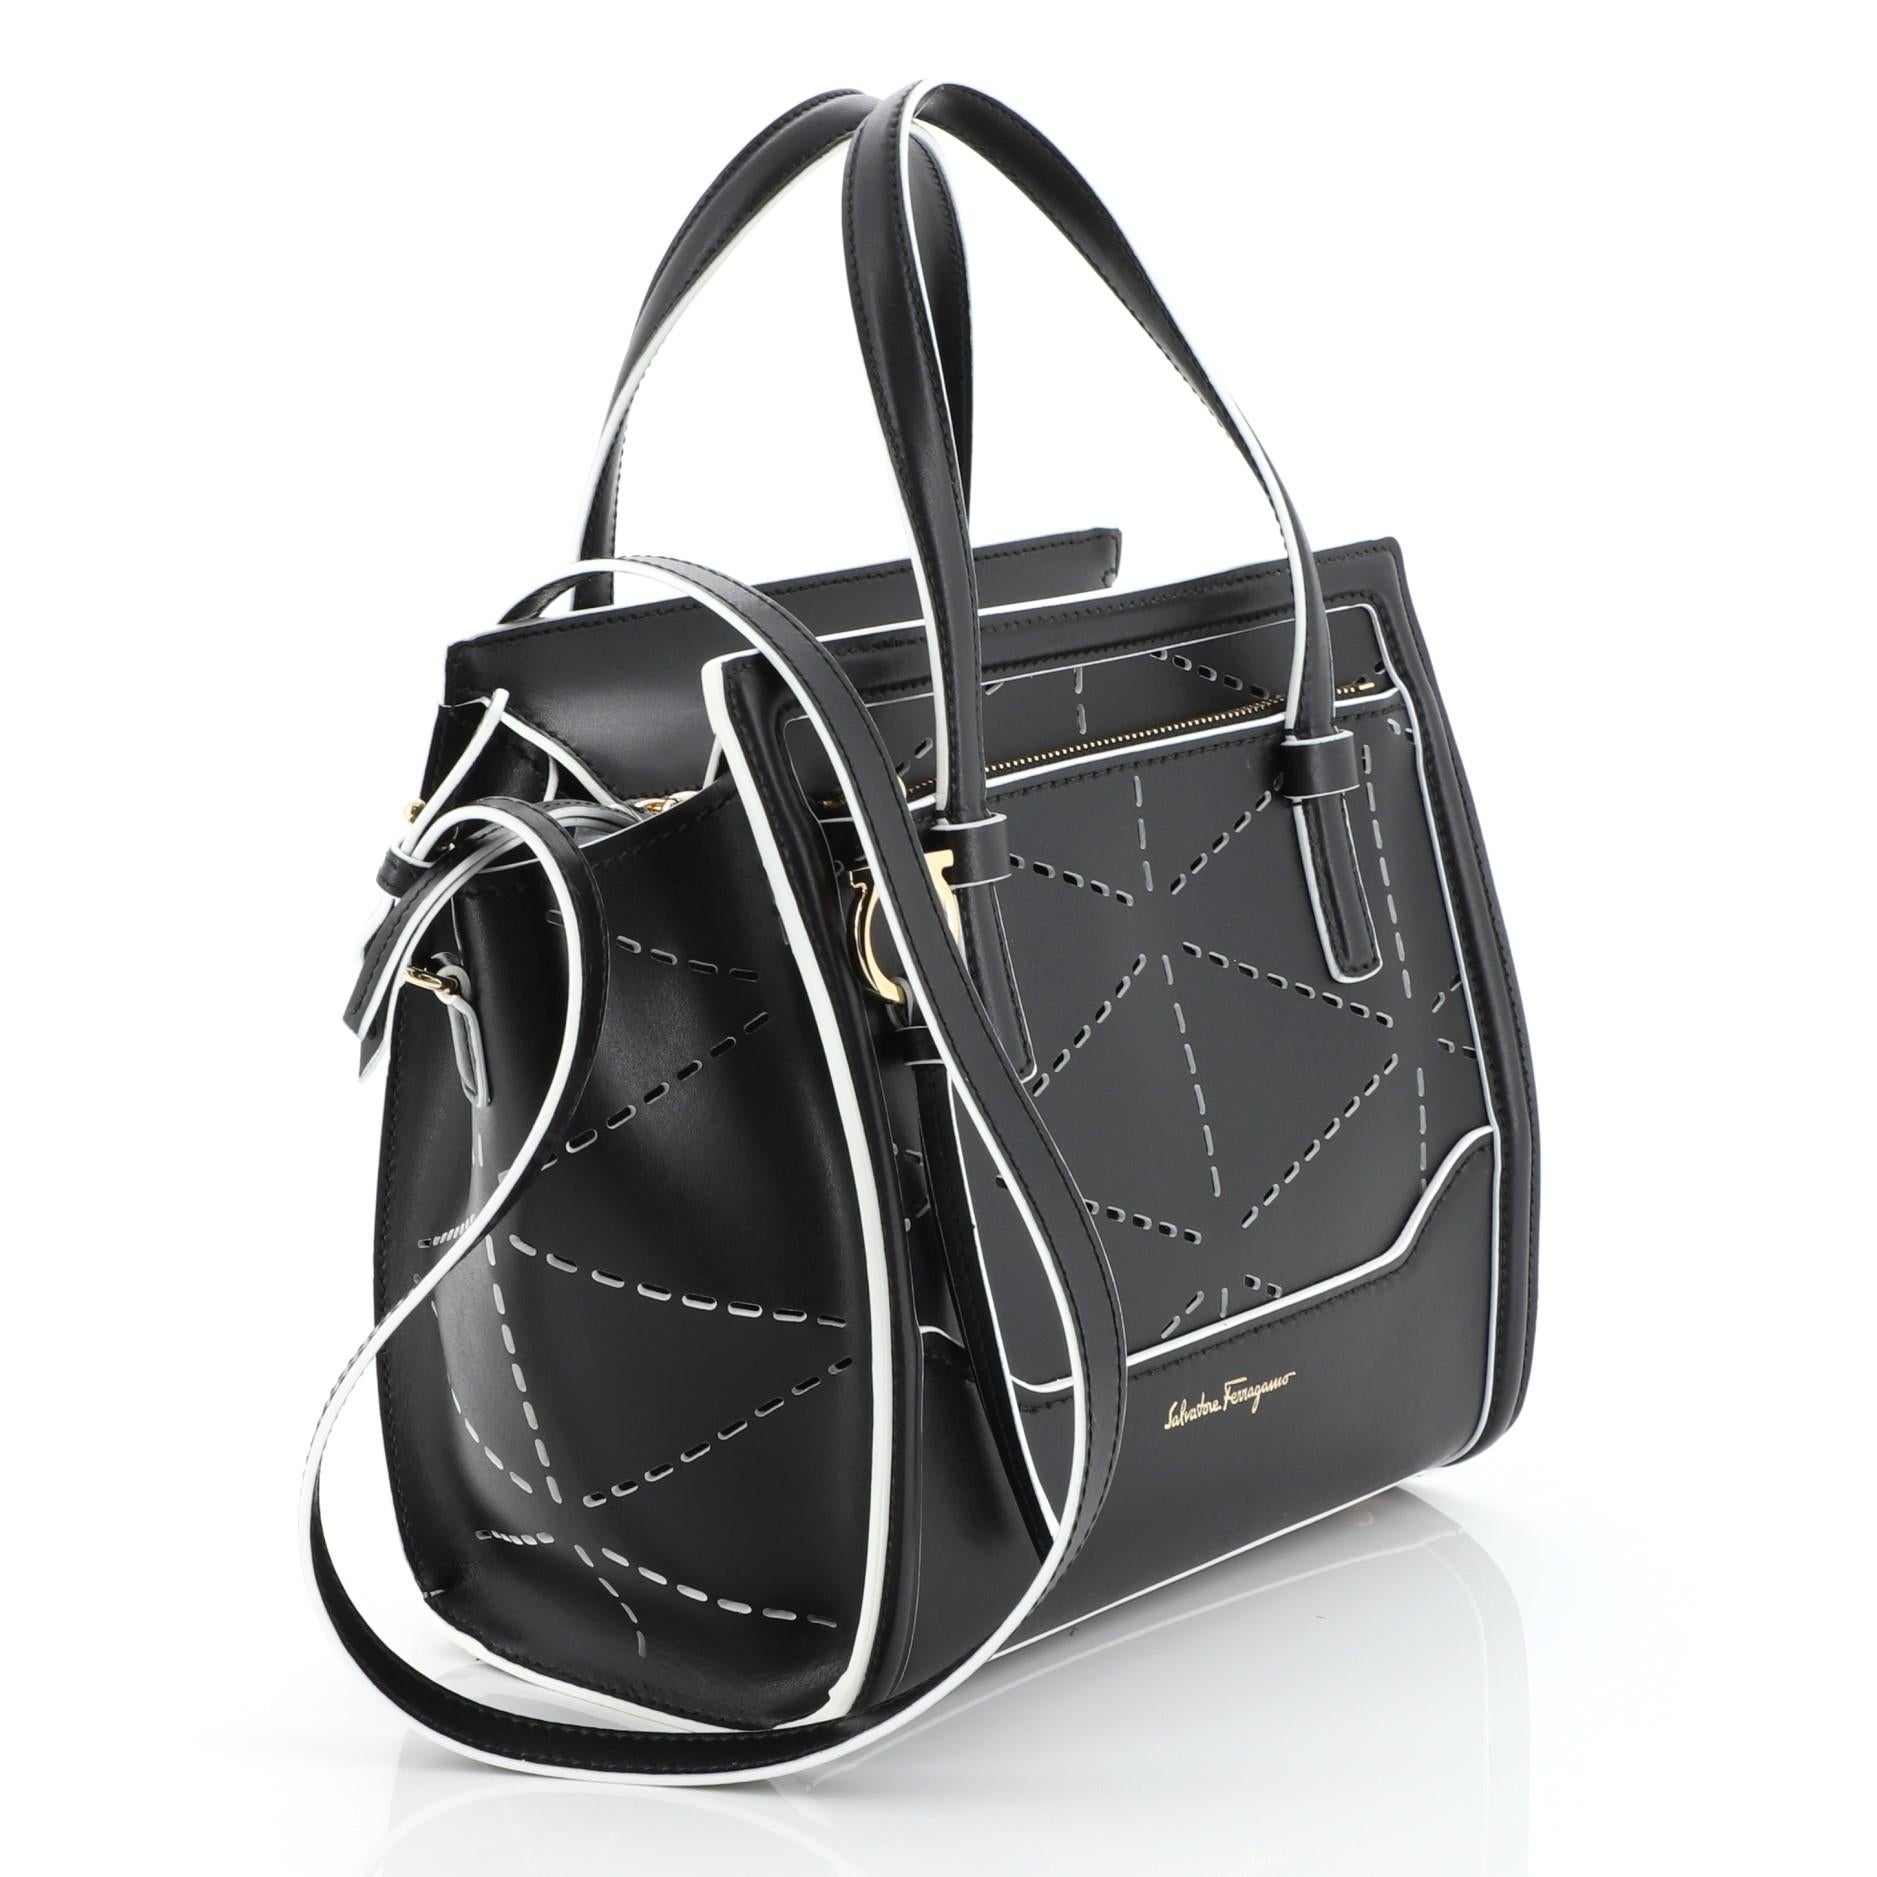 This Salvatore Ferragamo Amy Tote Perforated Leather Mini, crafted from black perforated leather, features dual flat handles, exterior front zip pocket with Gancio charm zip pull, and gold-tone hardware. Its zip closure opens to a black leather